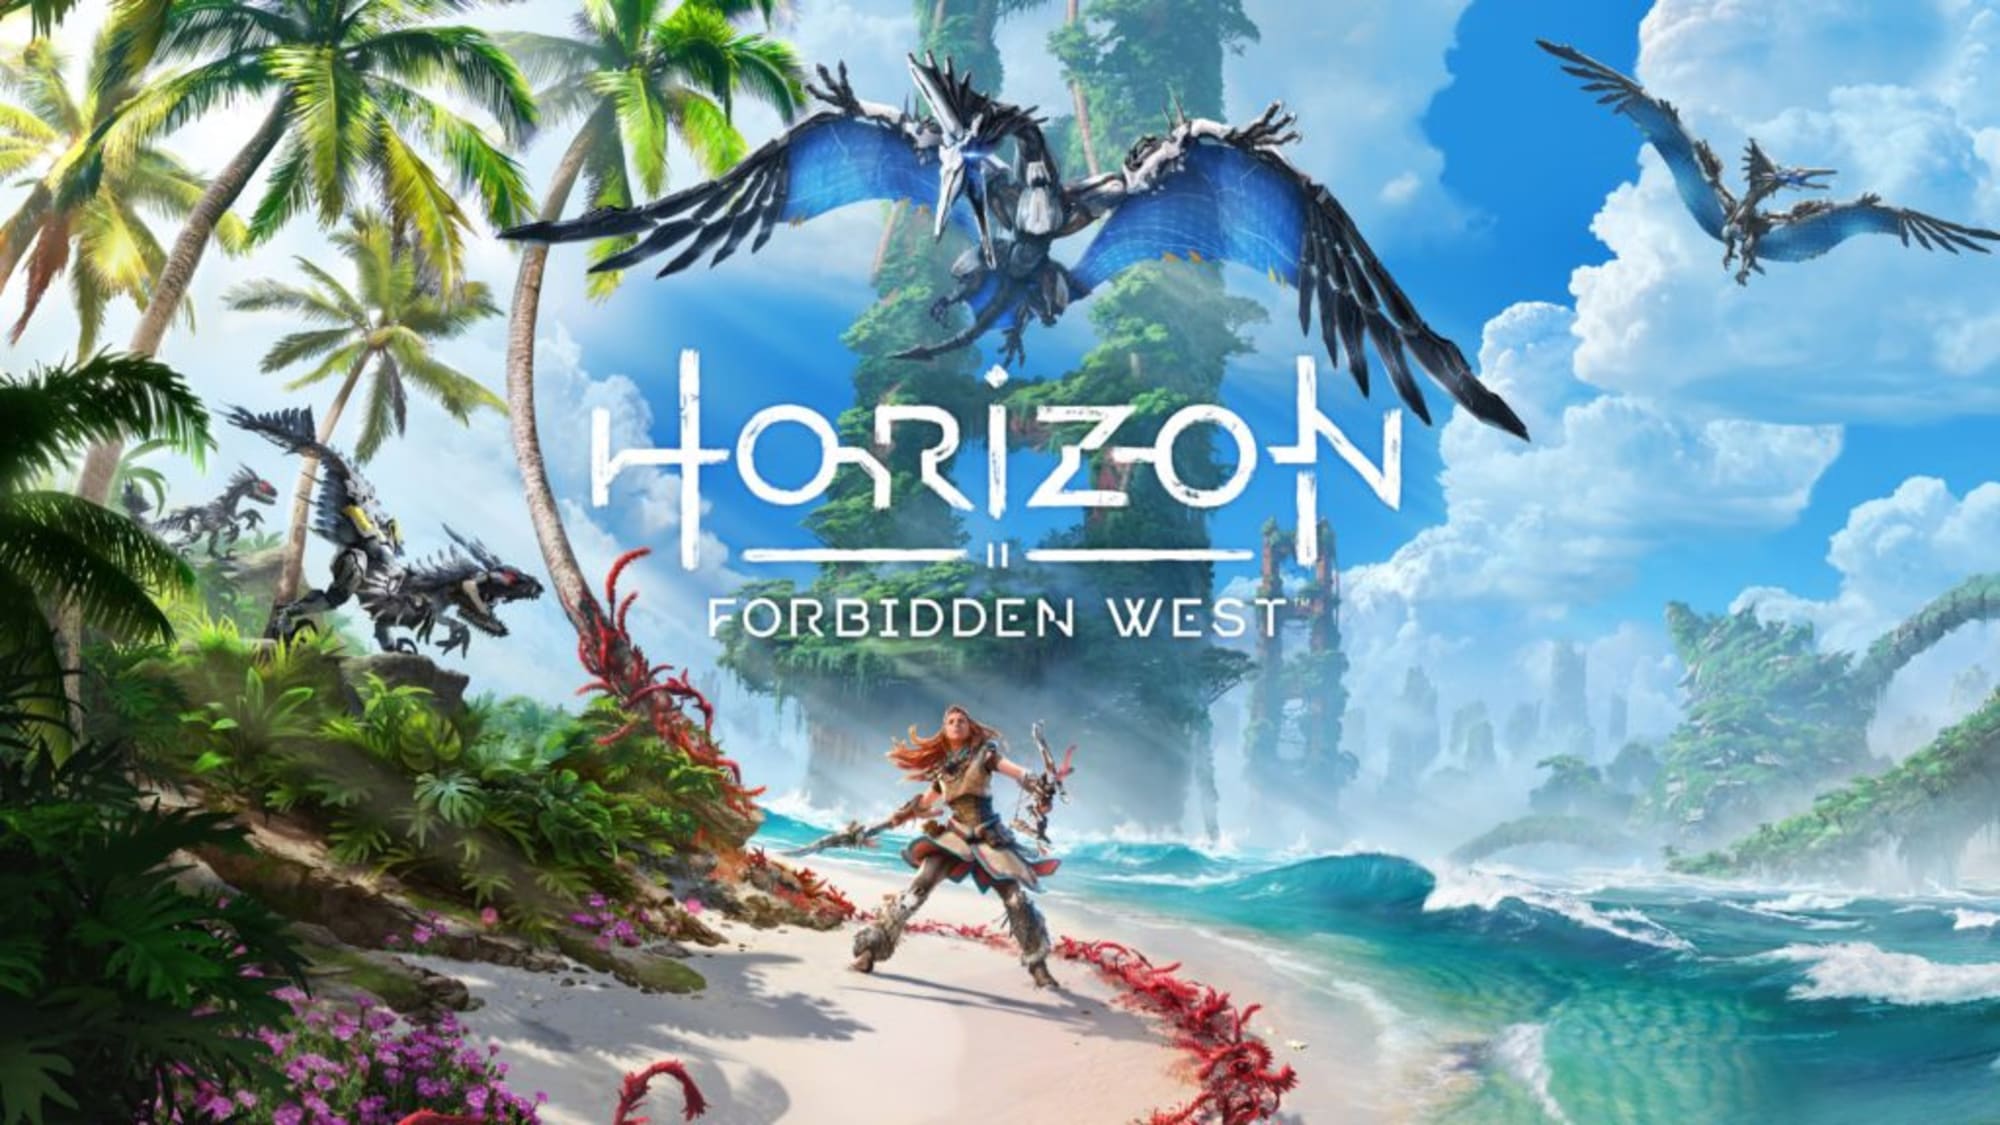 Horizon: Forbidden West is one of the greatest game sequels of all time